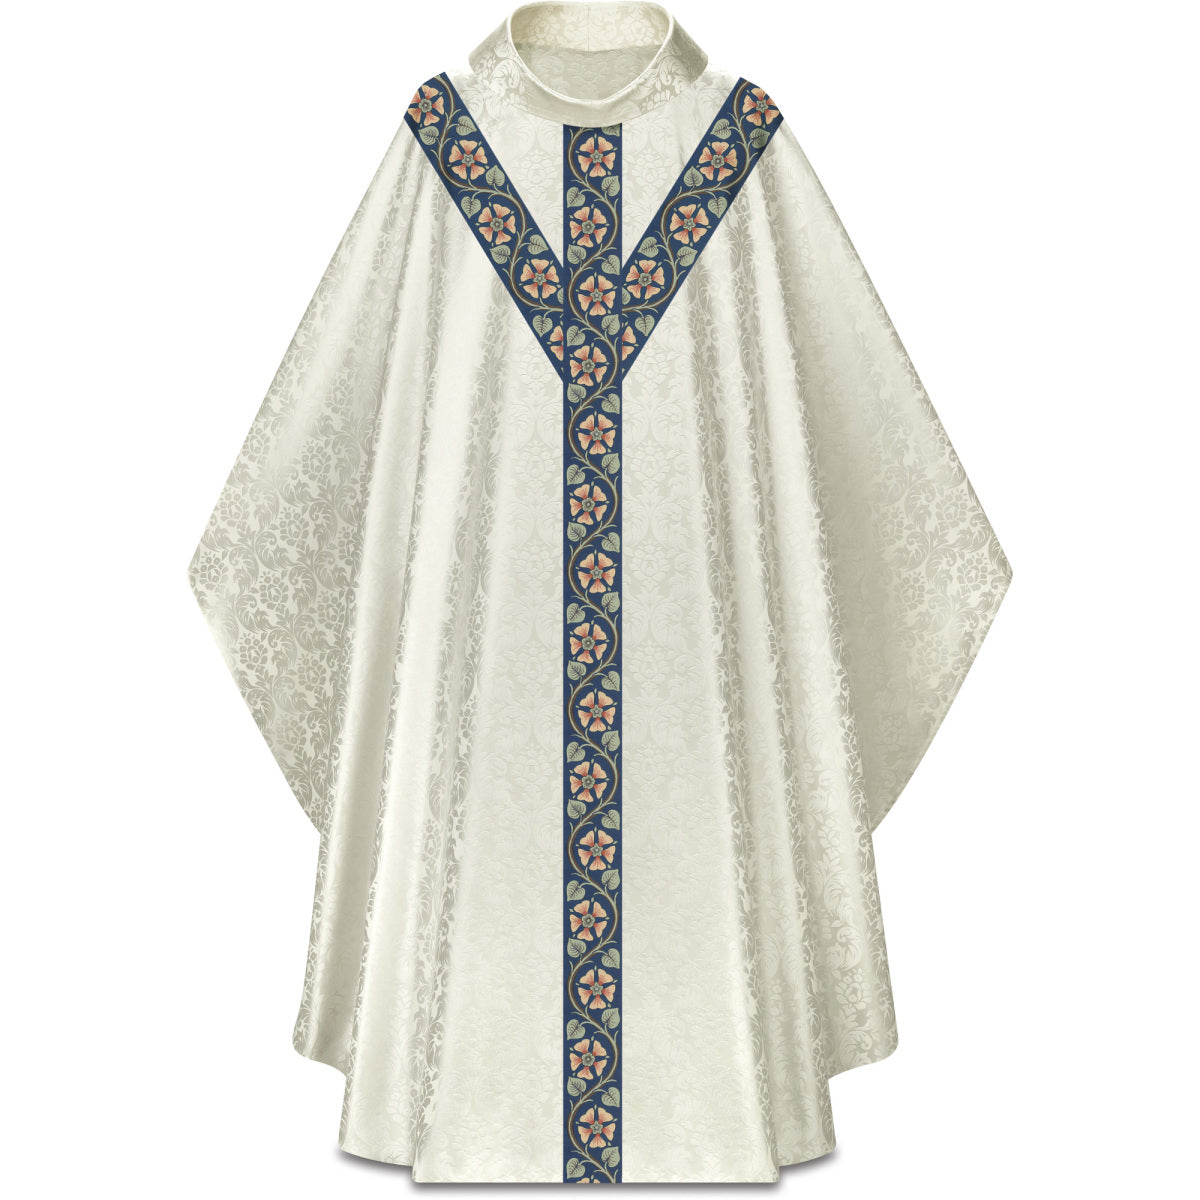 Chasuble on Damask fabric and Floral Banding